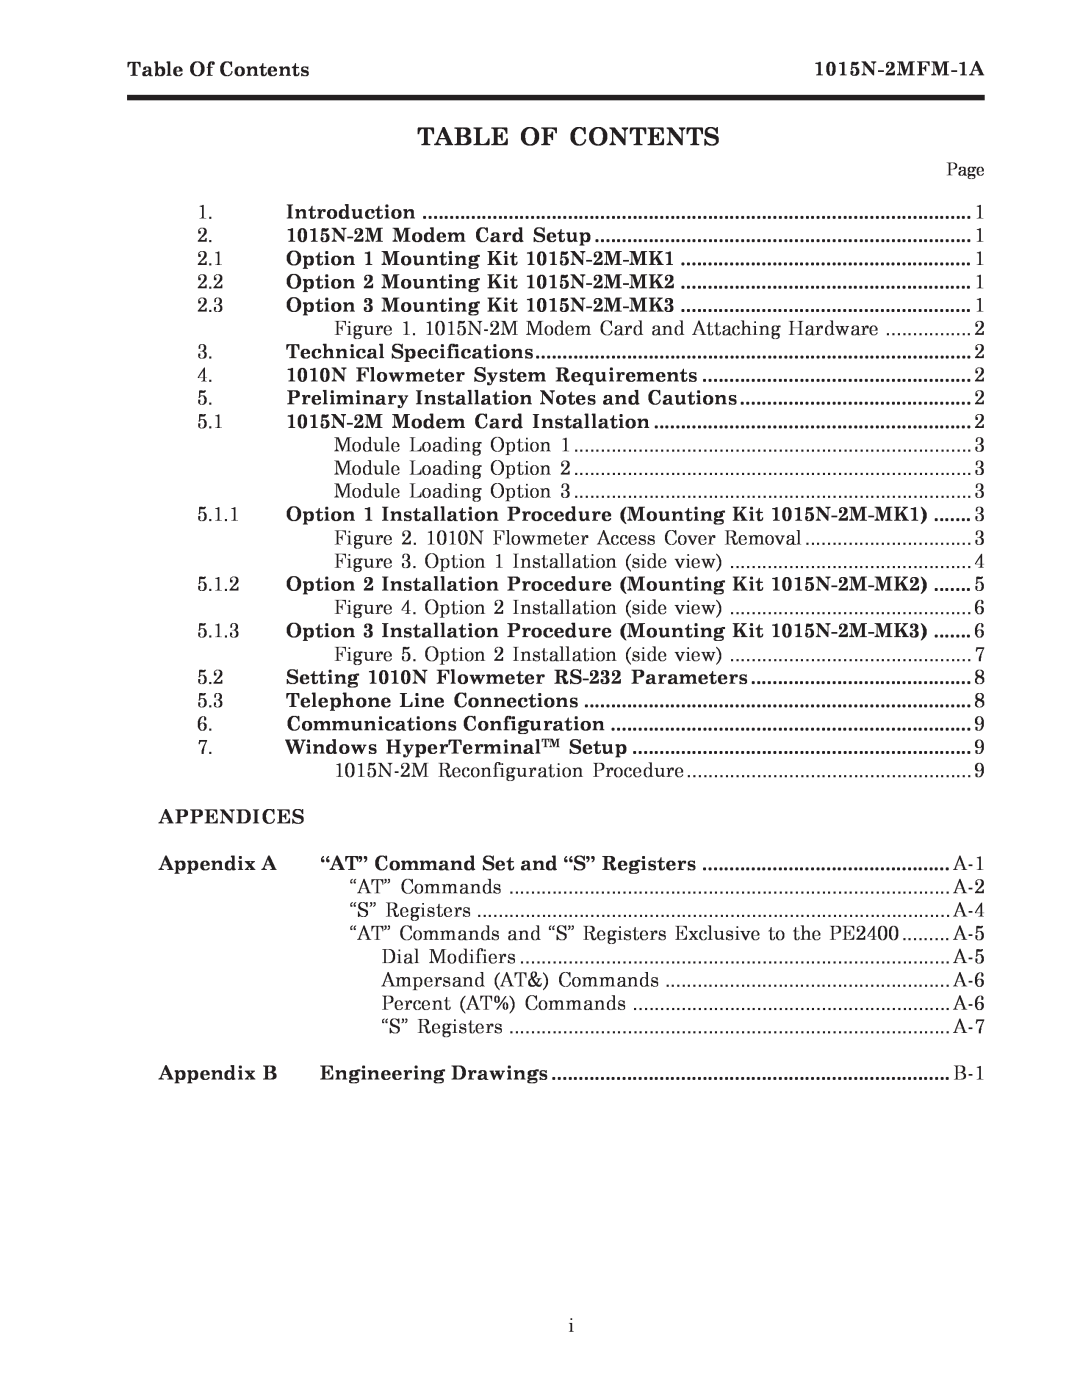 Siemens 1015N-2MFM-1A manual Table Of Contents, Page 